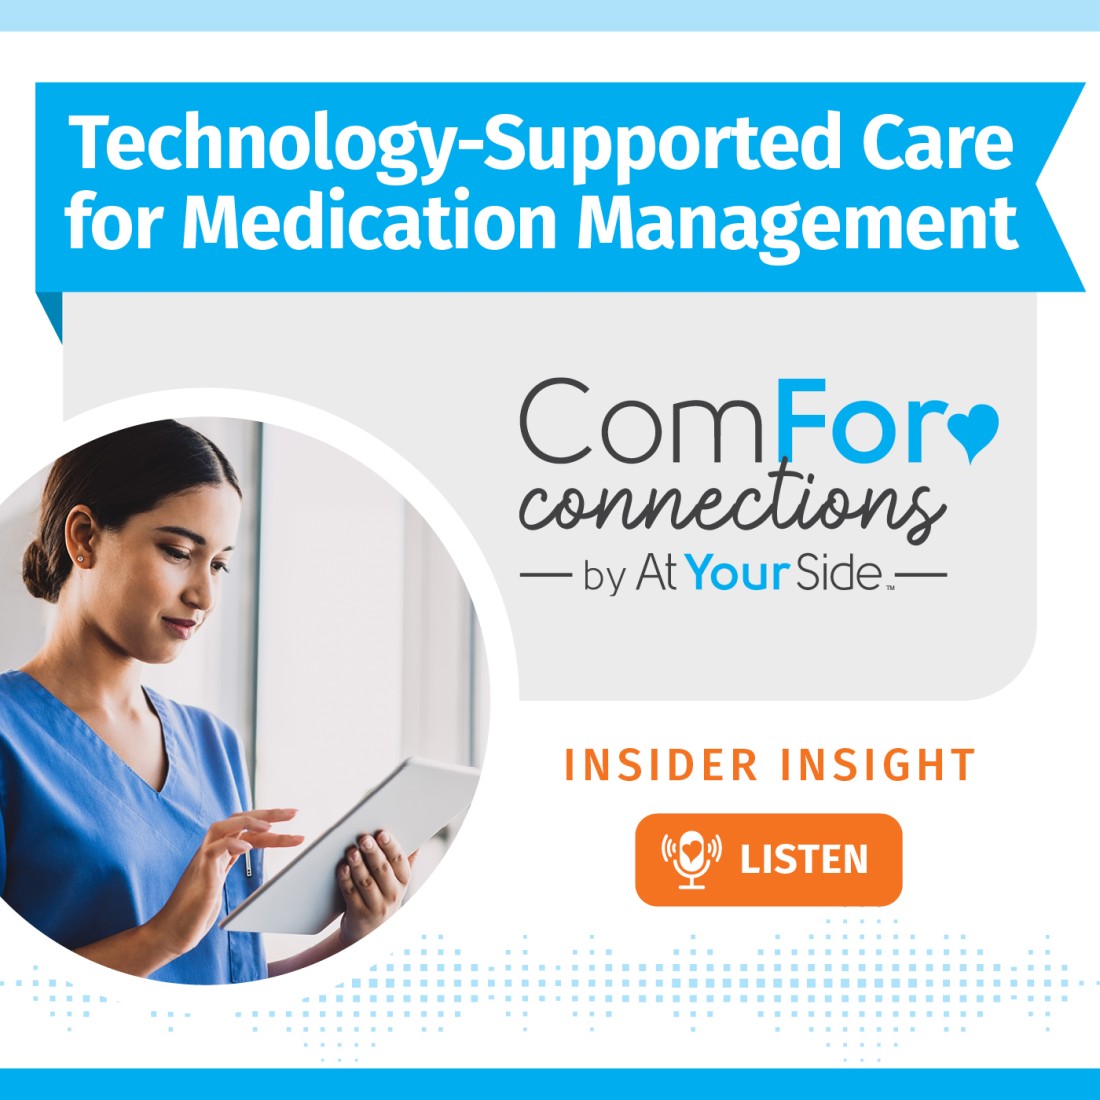 Podcast Resources: Expanding Your Home Care Knowledge - Social_Media_Graphics__Technology-Supported_Care_for_Medication_Management